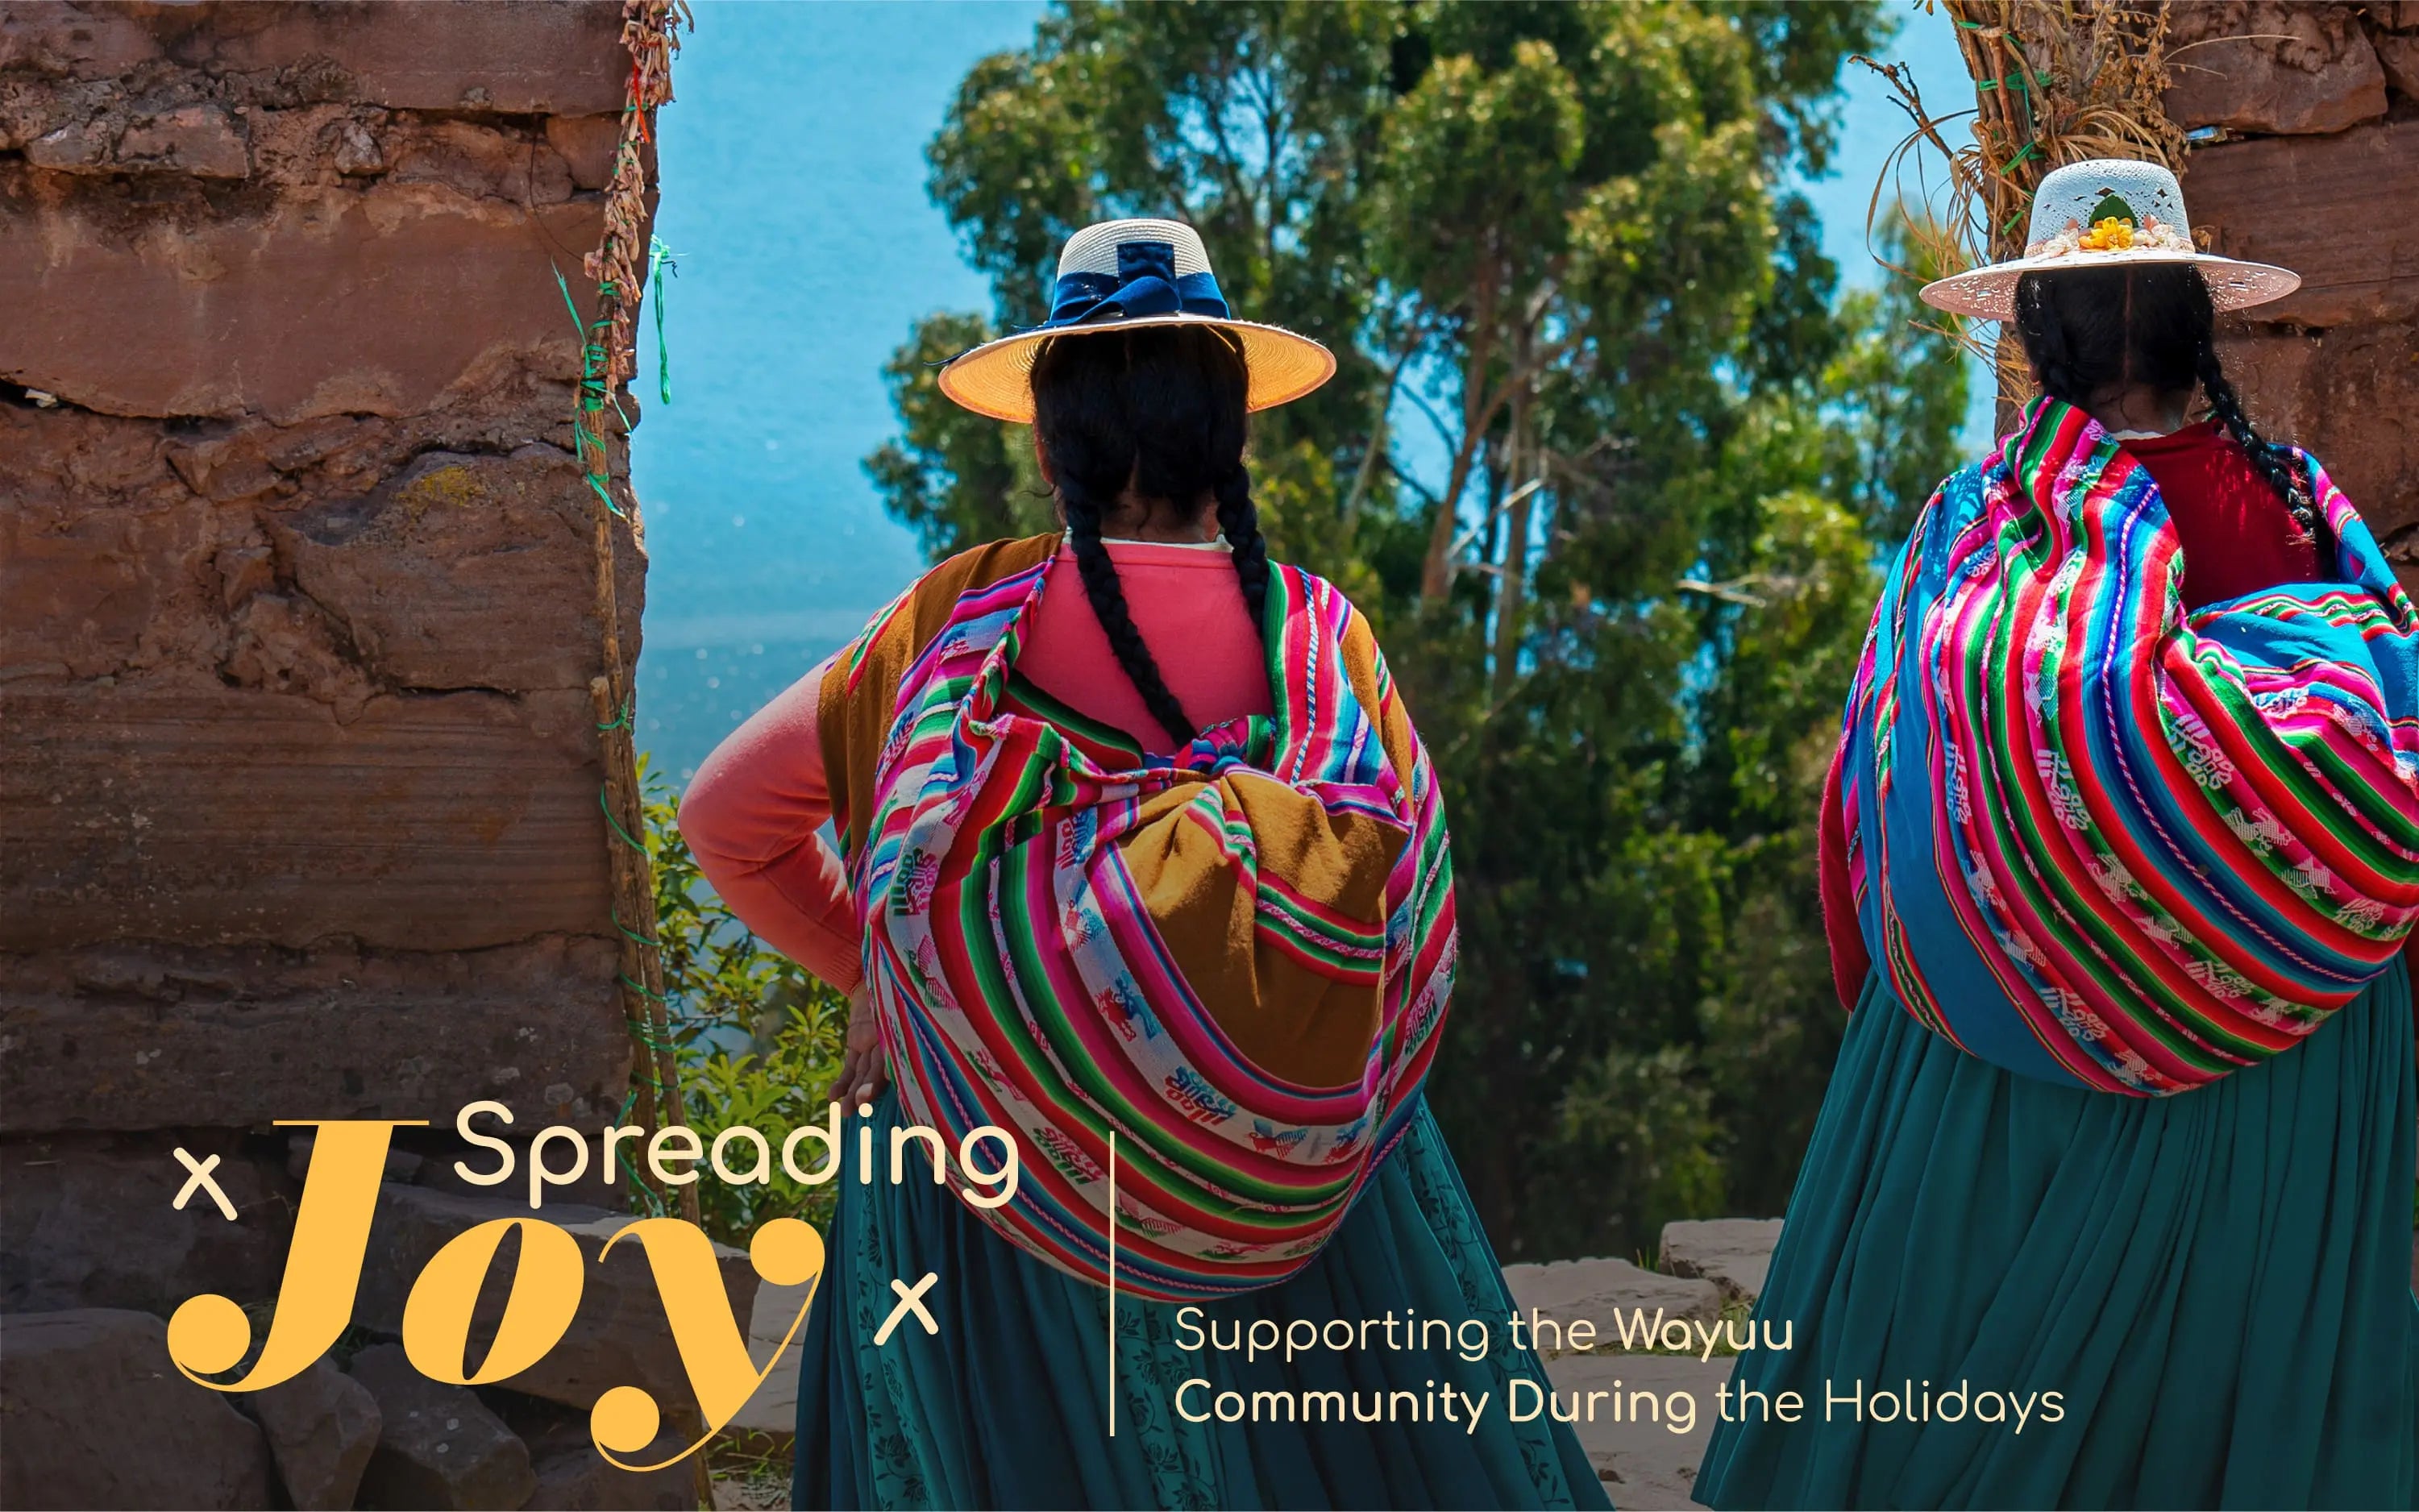 Spreading Joy: Supporting the Wayuu Community During the Holidays